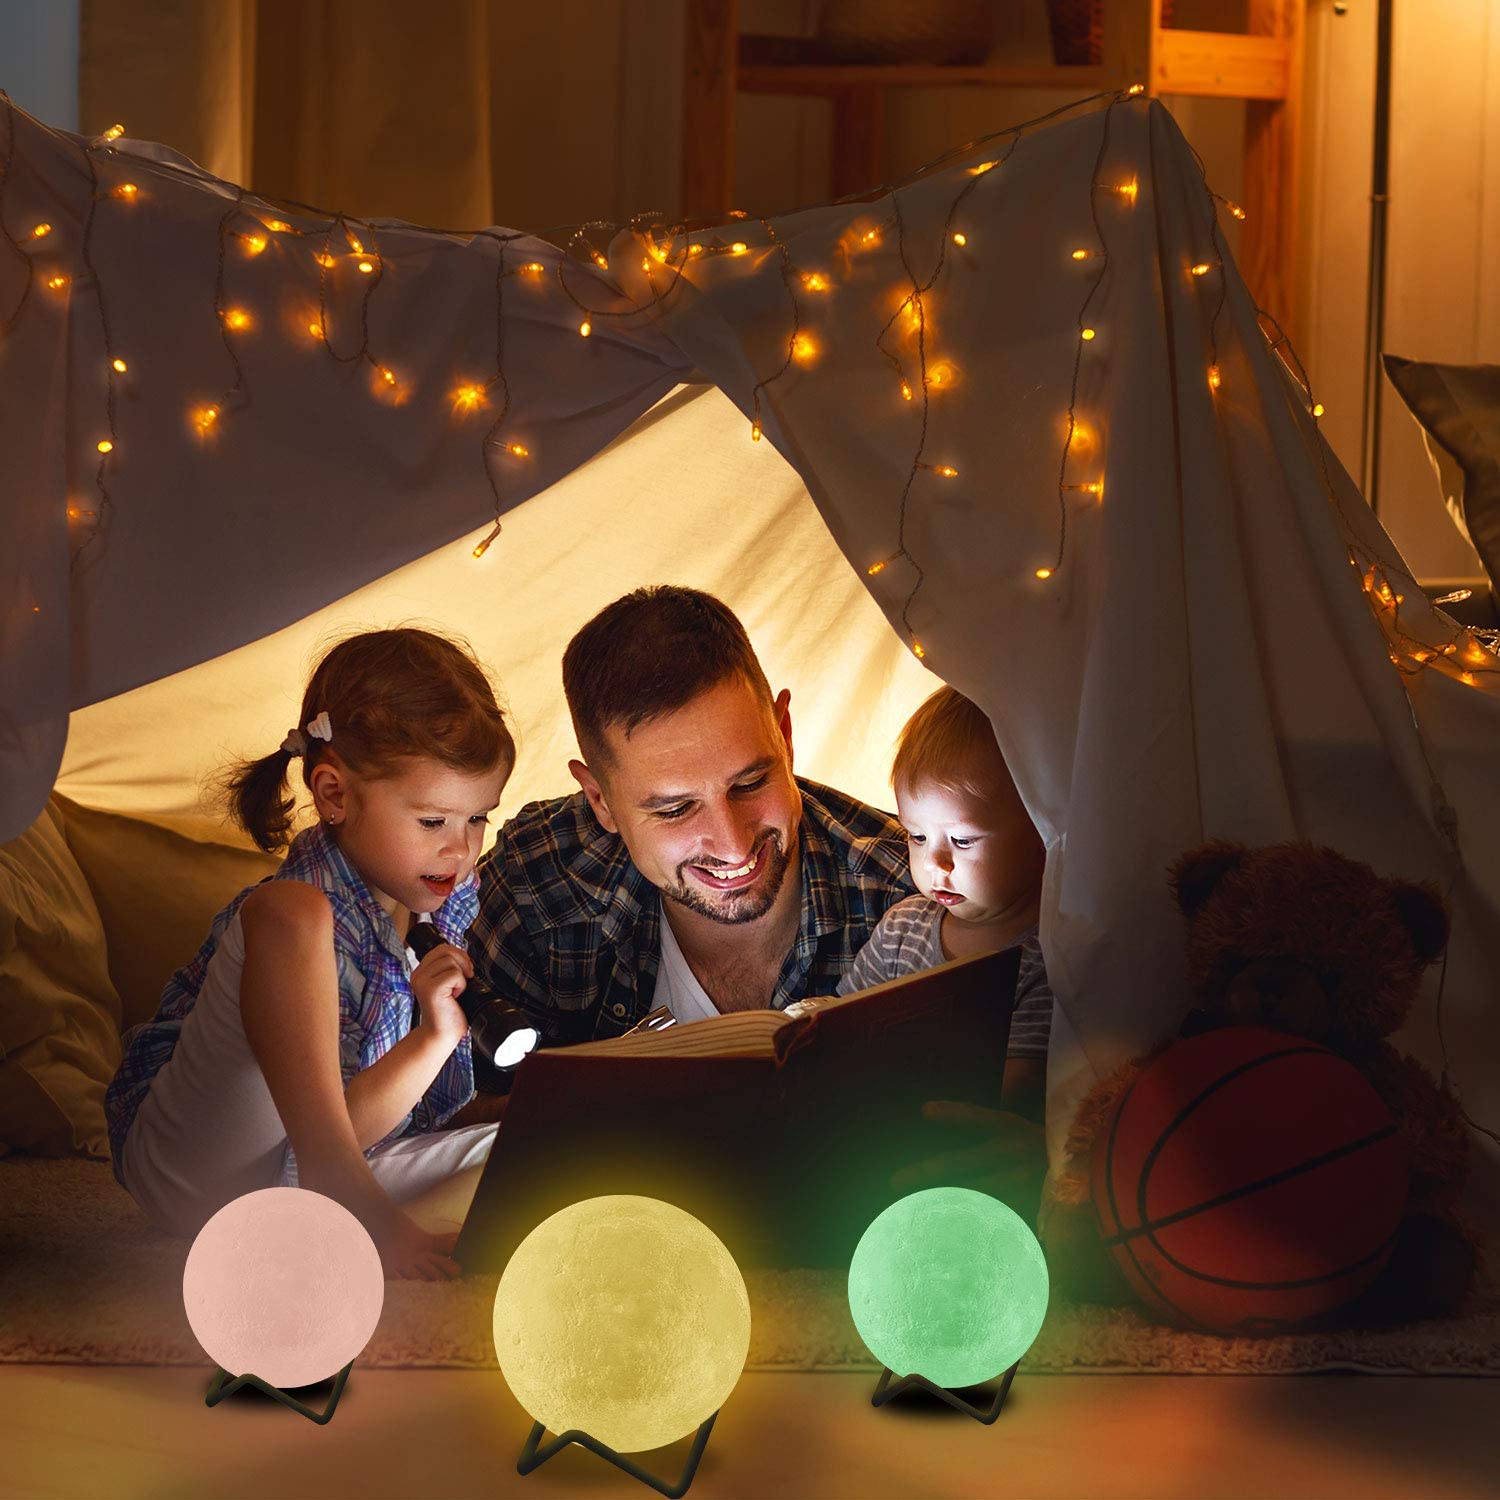 Moon Lamp for Kids with Metal Stand, Valentine's Day Gift, Timer Remote Control, 16 Colors 5 Brightness, Night Light